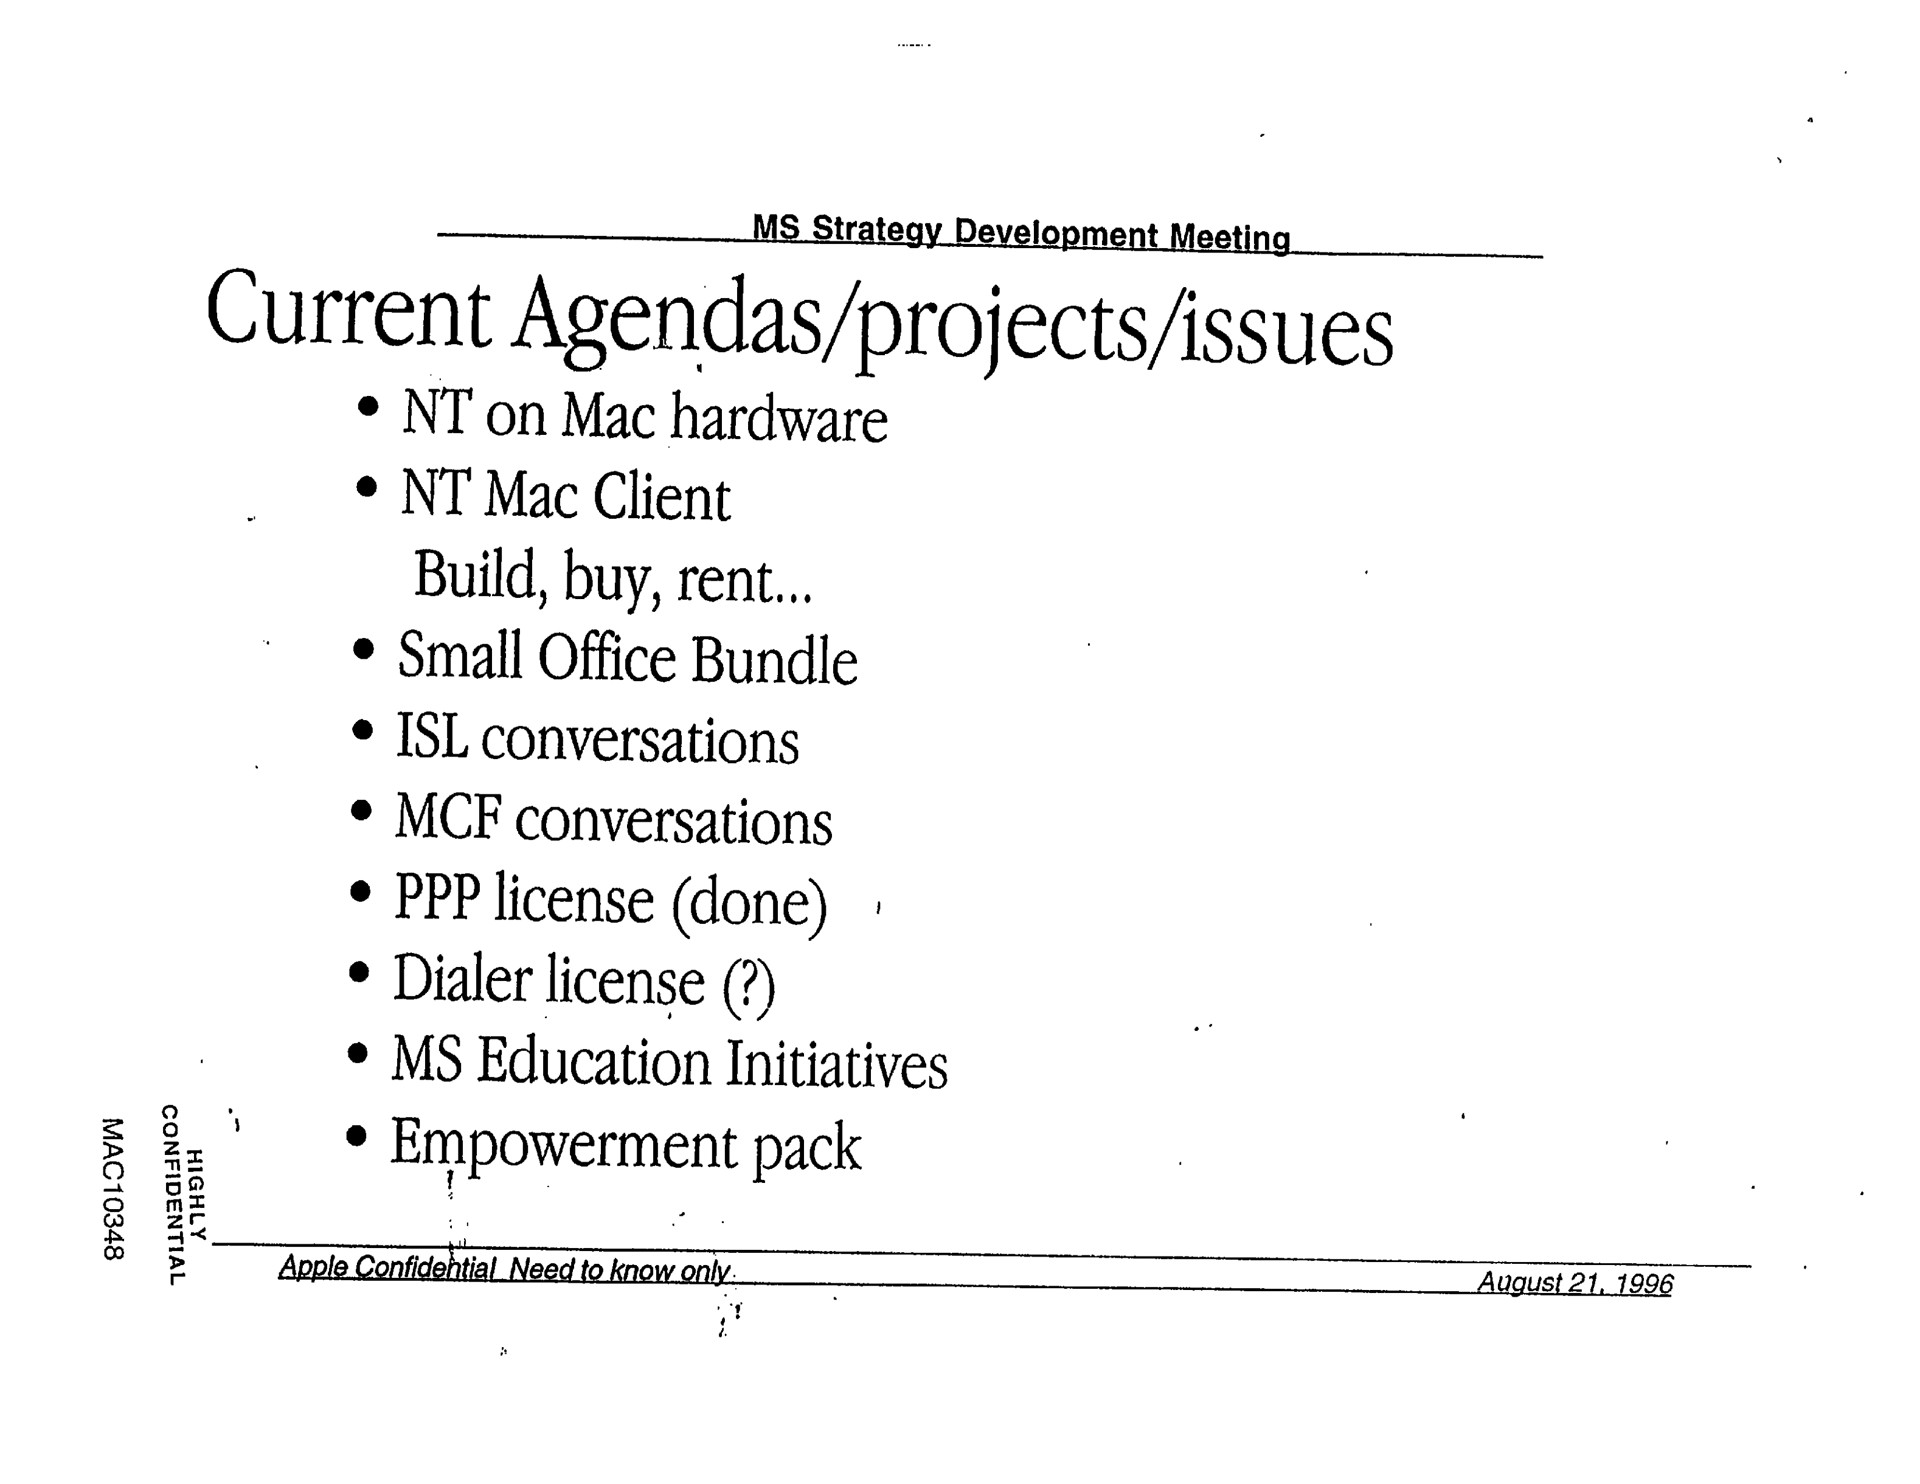 current agendas projects issues on mac hardware mac client build buy rent small office bundle license done dialer license education initiatives empowerment pack | Apple